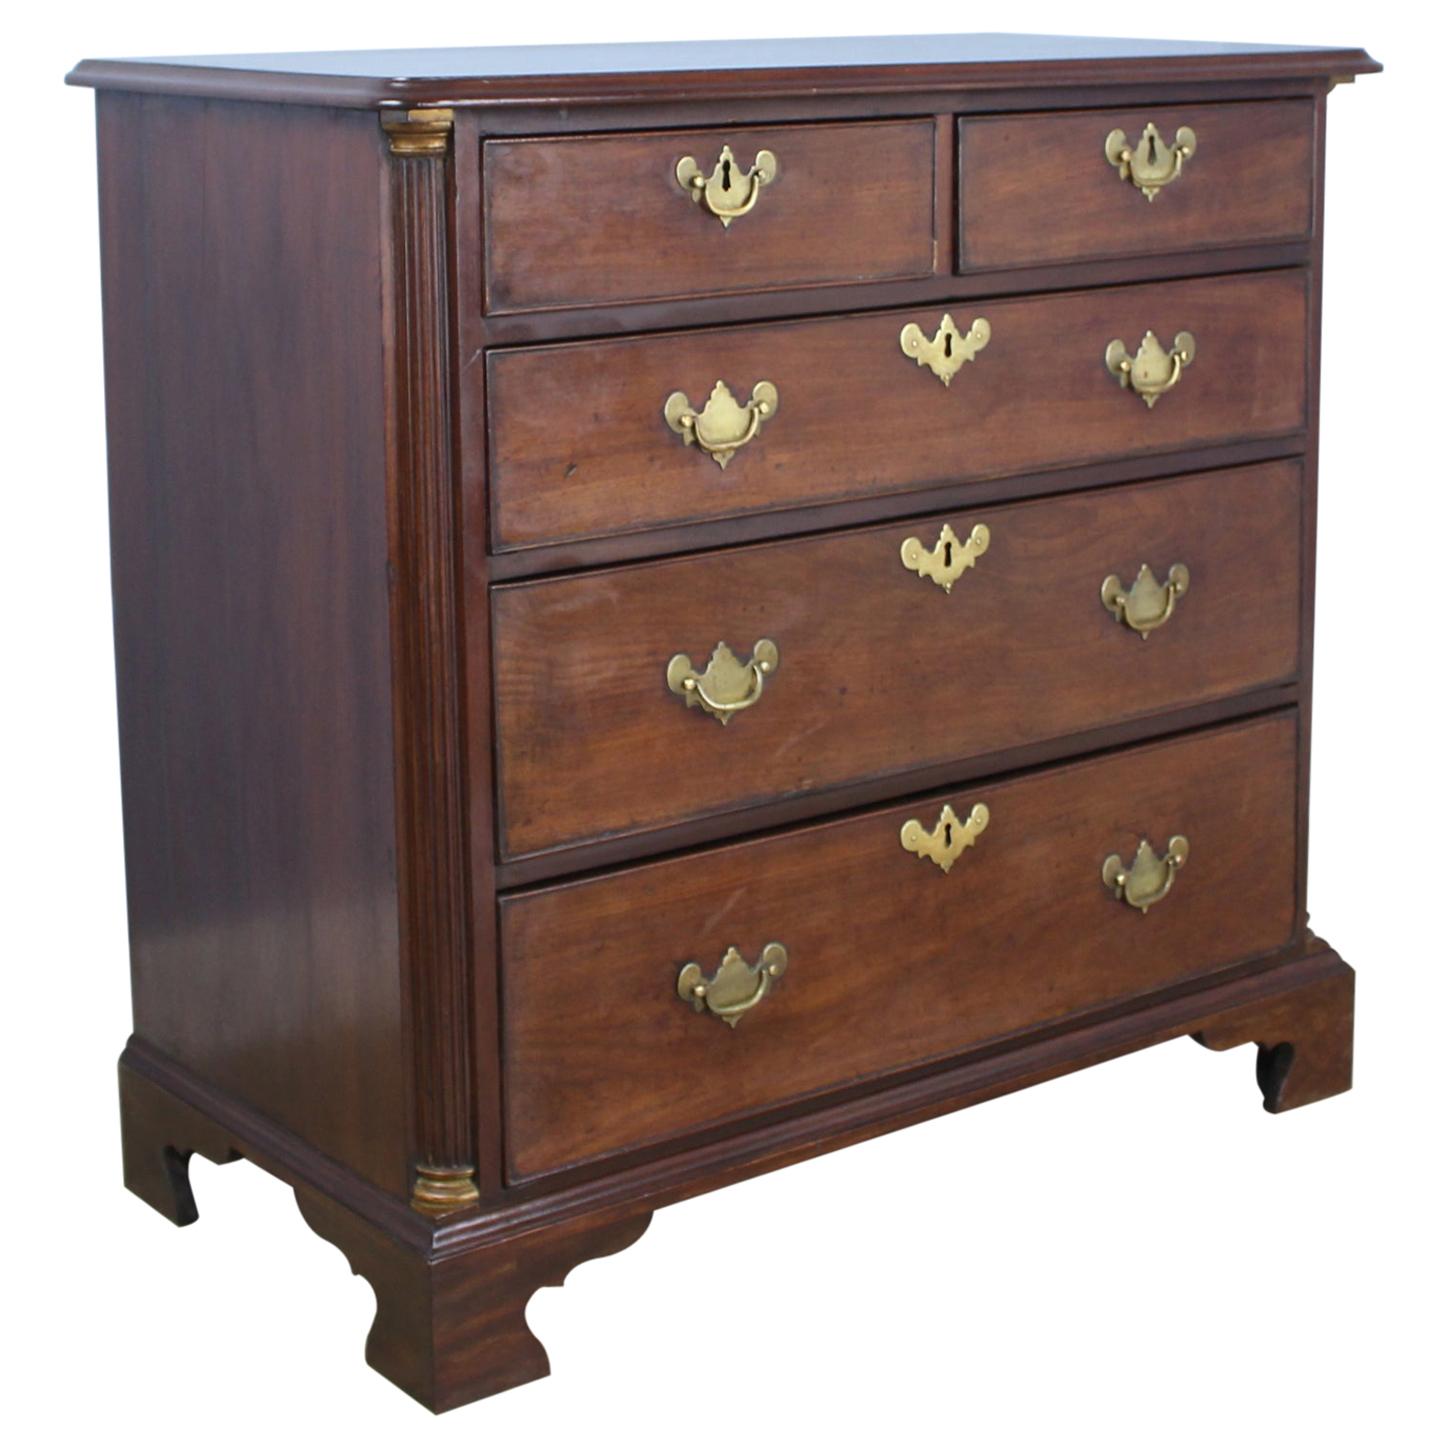 Georgian Mahogany Chest of Drawers, Quarter Columns and Brass Capitals